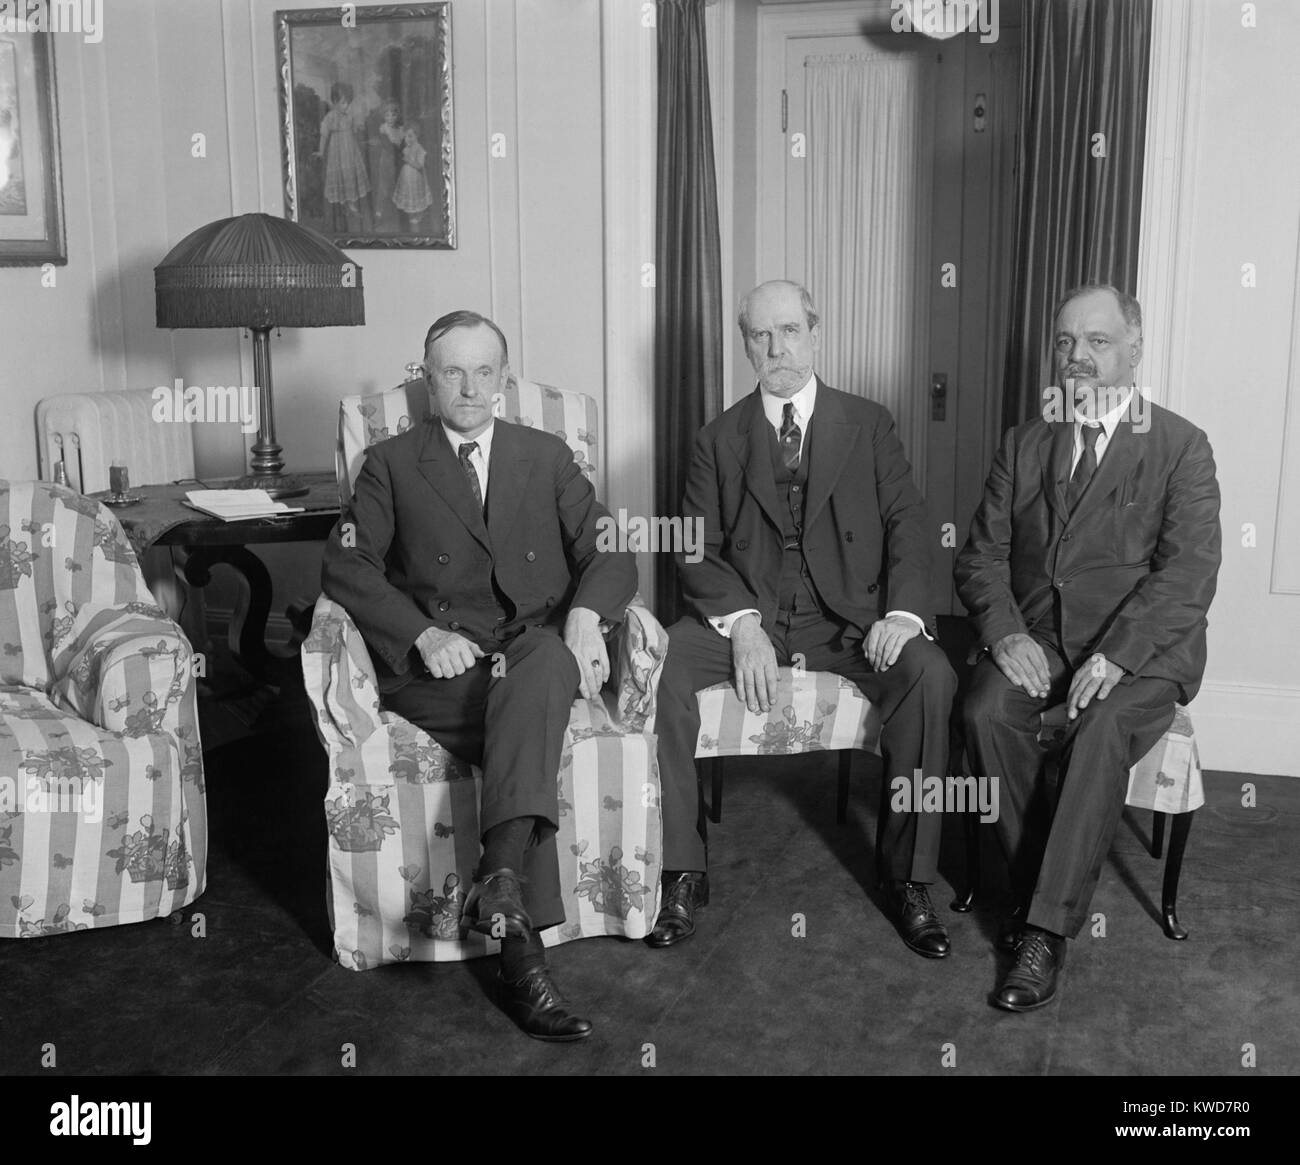 President Calvin Coolidge meeting with Charles Evans Hughes and Charles Curtis, August 3, 1923. Coolidge became President the previous day after Warren Harding died suddenly in San Francisco. Hughes was Secretary of State and Curtis was Senate Minority Whip. They met in the Coolidge family residence at the Willard Hotel, Washington D.C. (BSLOC 2015 16 13) Stock Photo